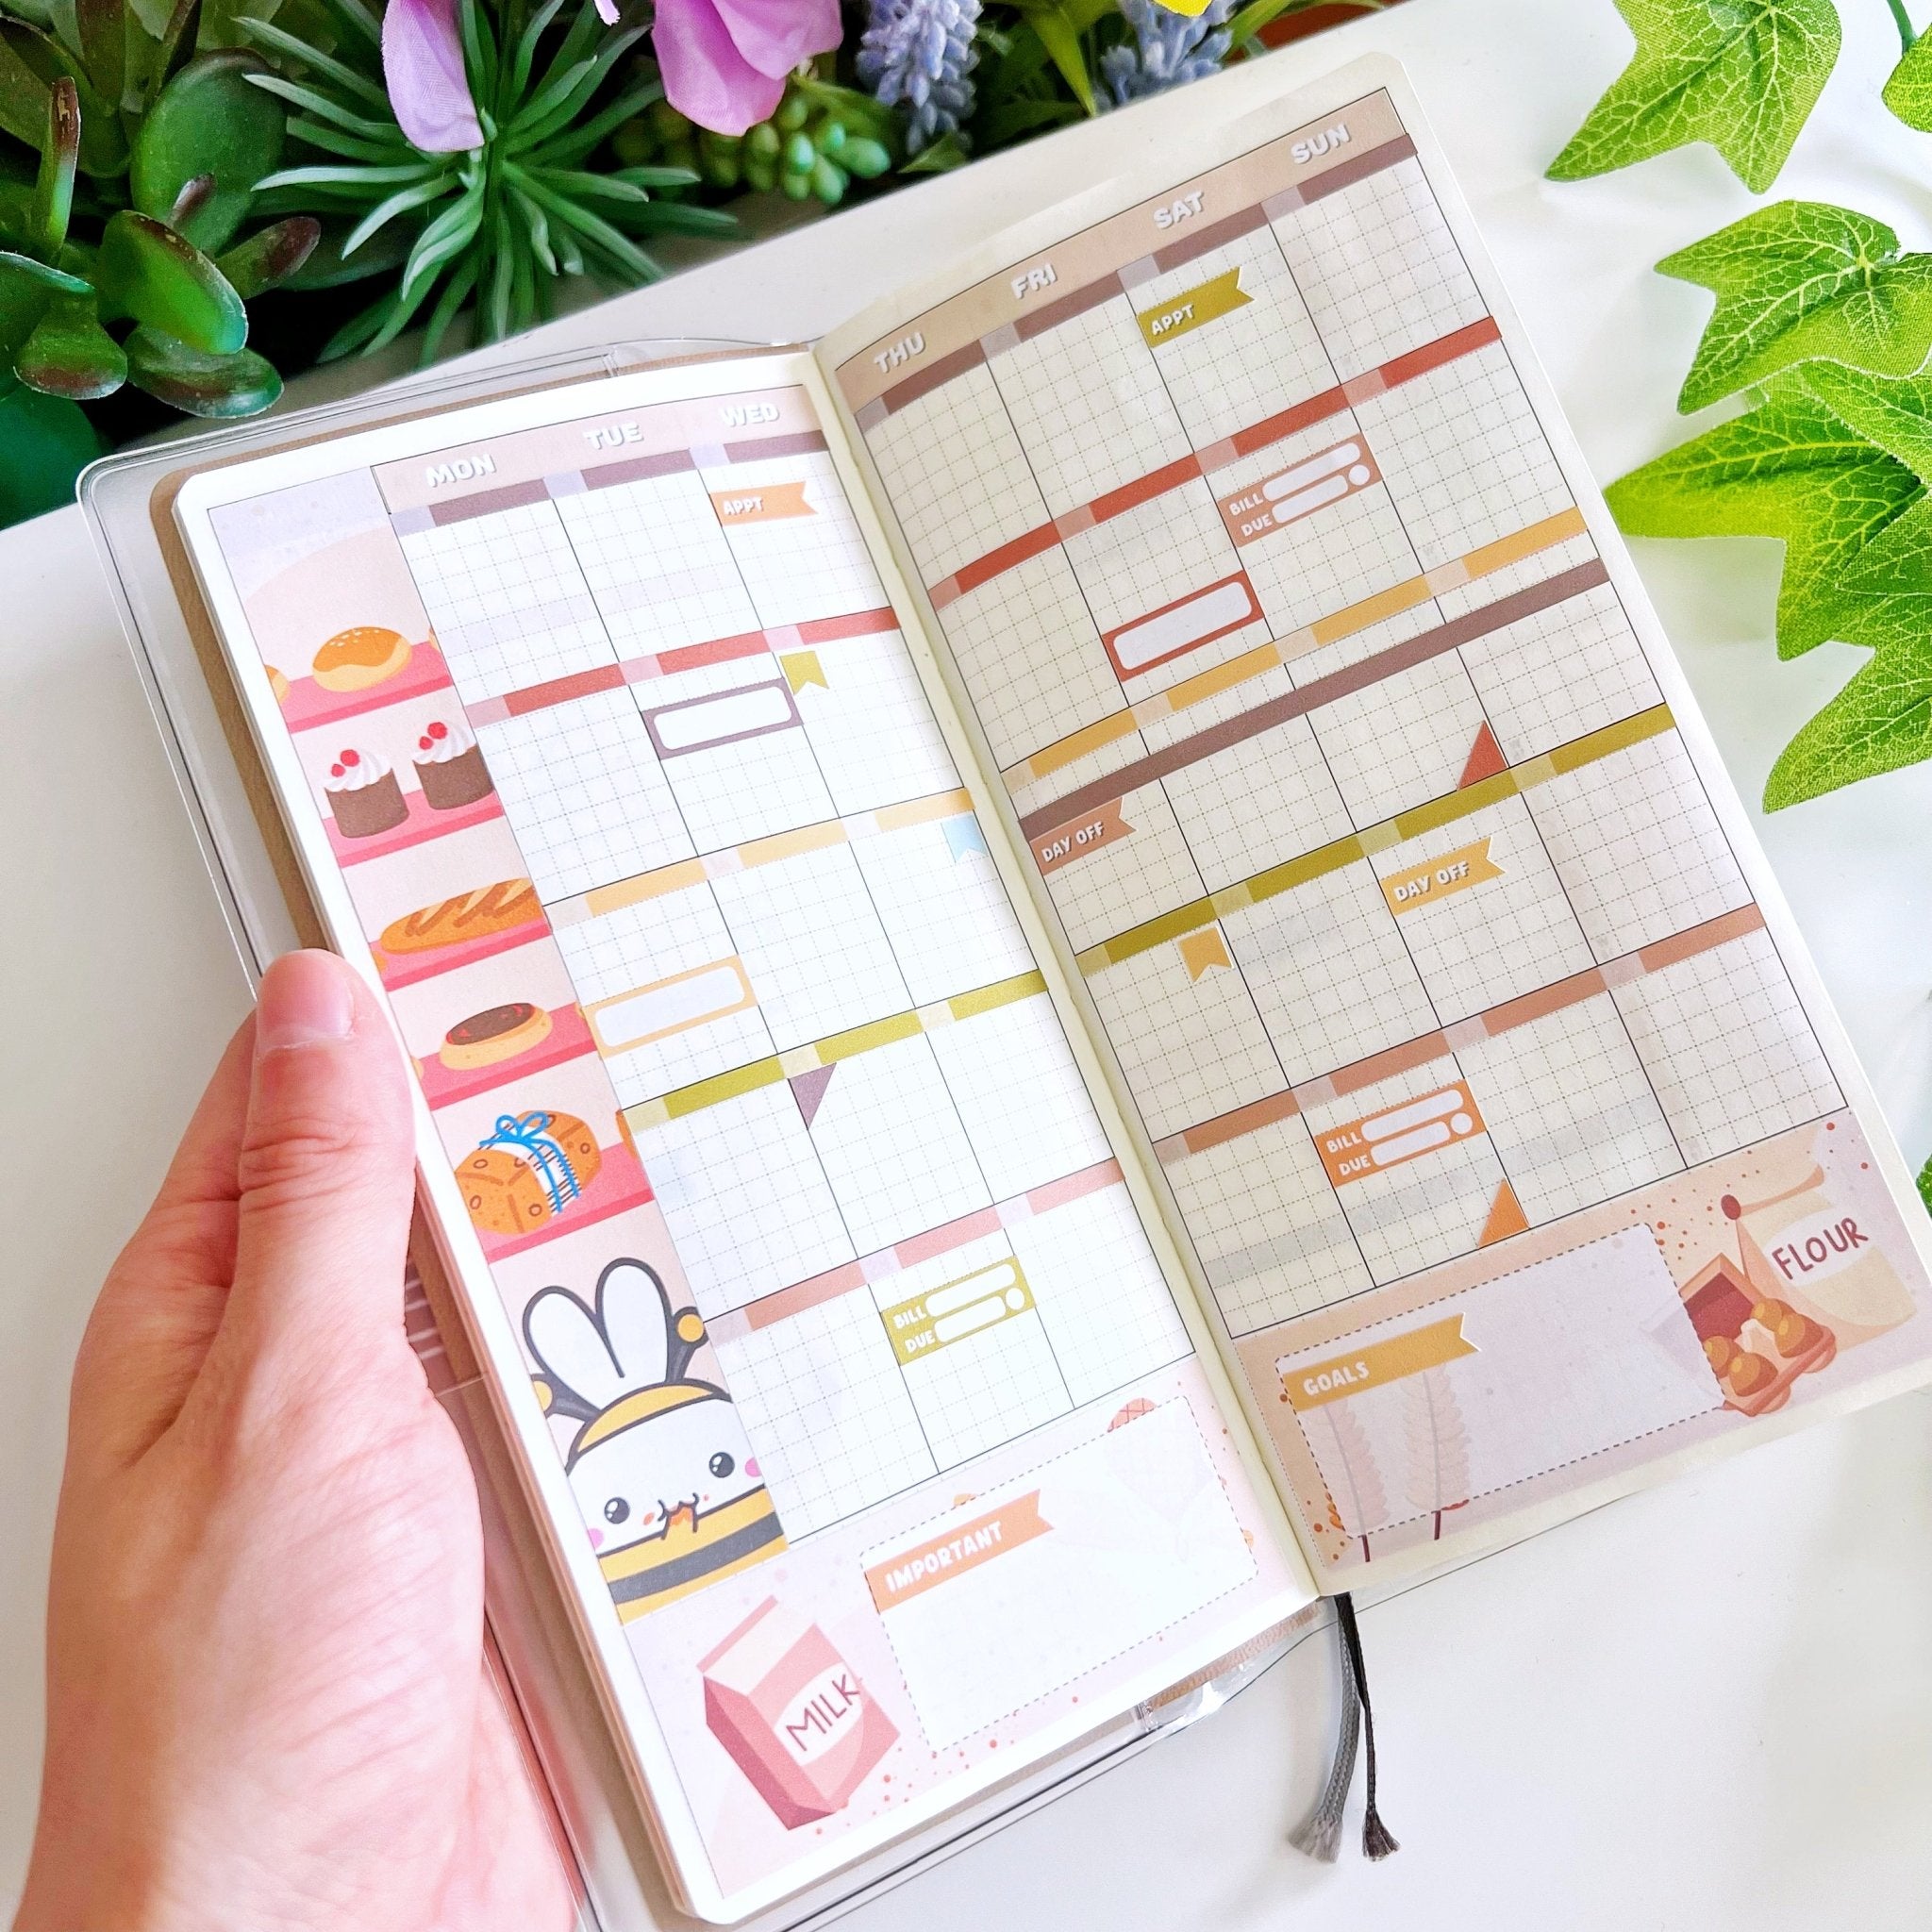 SLT Hobonichi WEEKS Sticker Subscription (Month-to-Month Plan) - SumLilThings